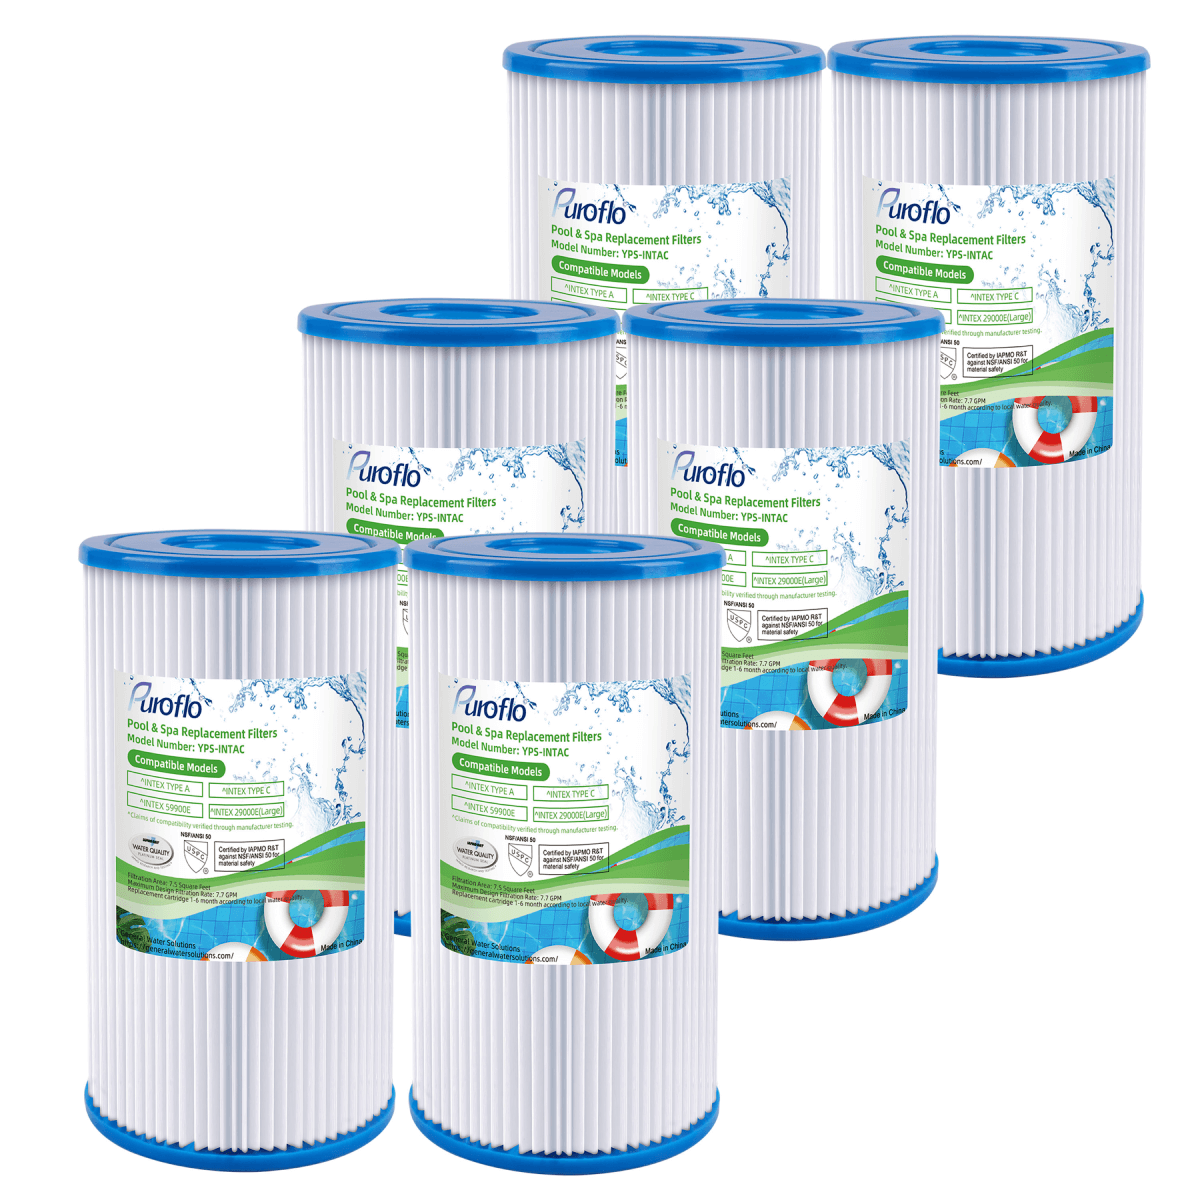 Puroflo Type A or C 29000E/59900E Replacement Pool Filter Cartridge for INTEX (6 Pack)